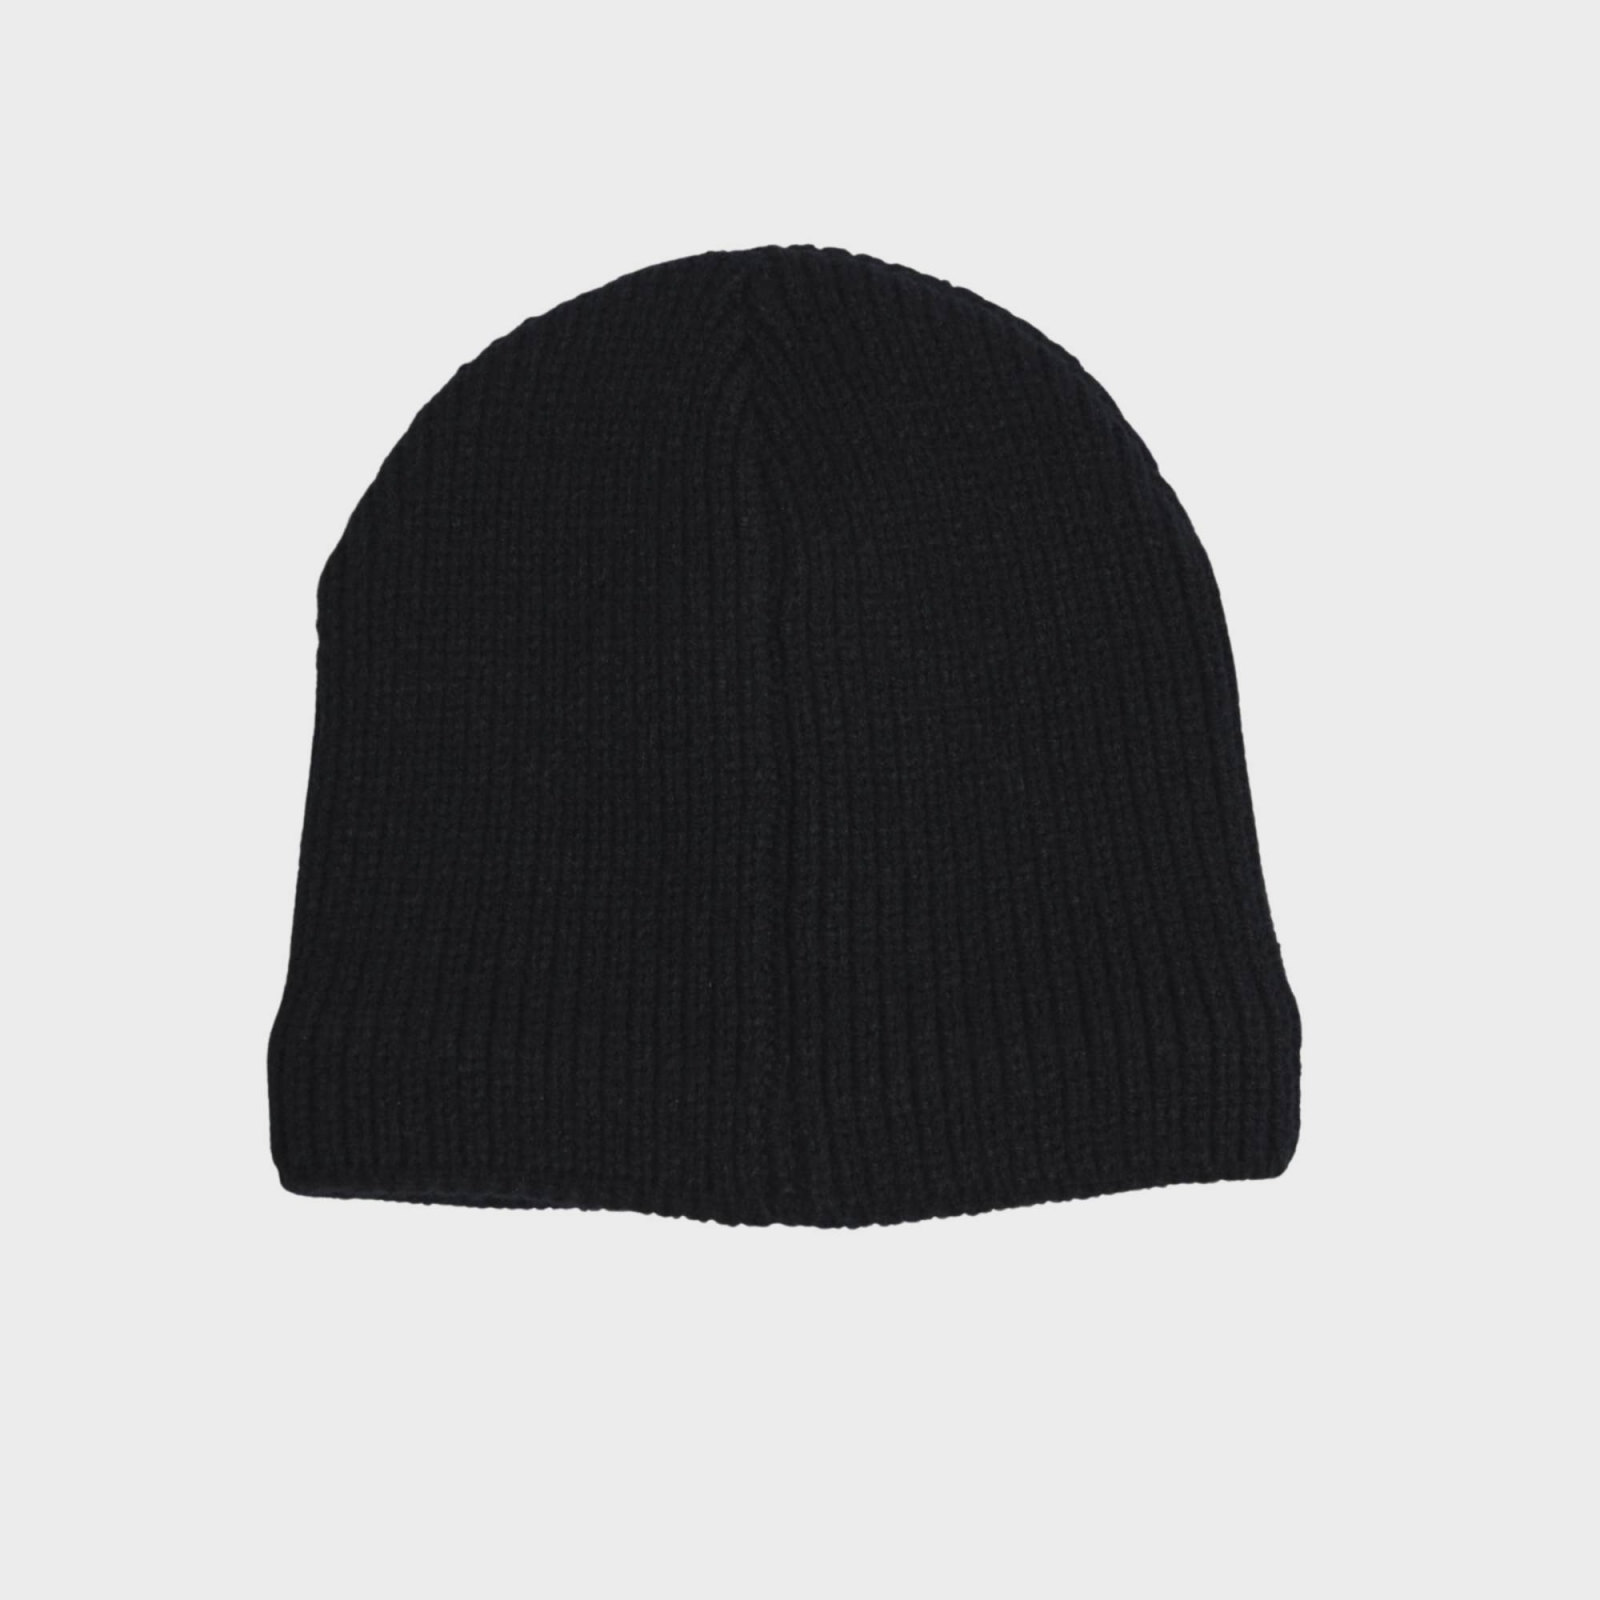 11 DEGREES FLEECE LINED KNITTED BEANIE